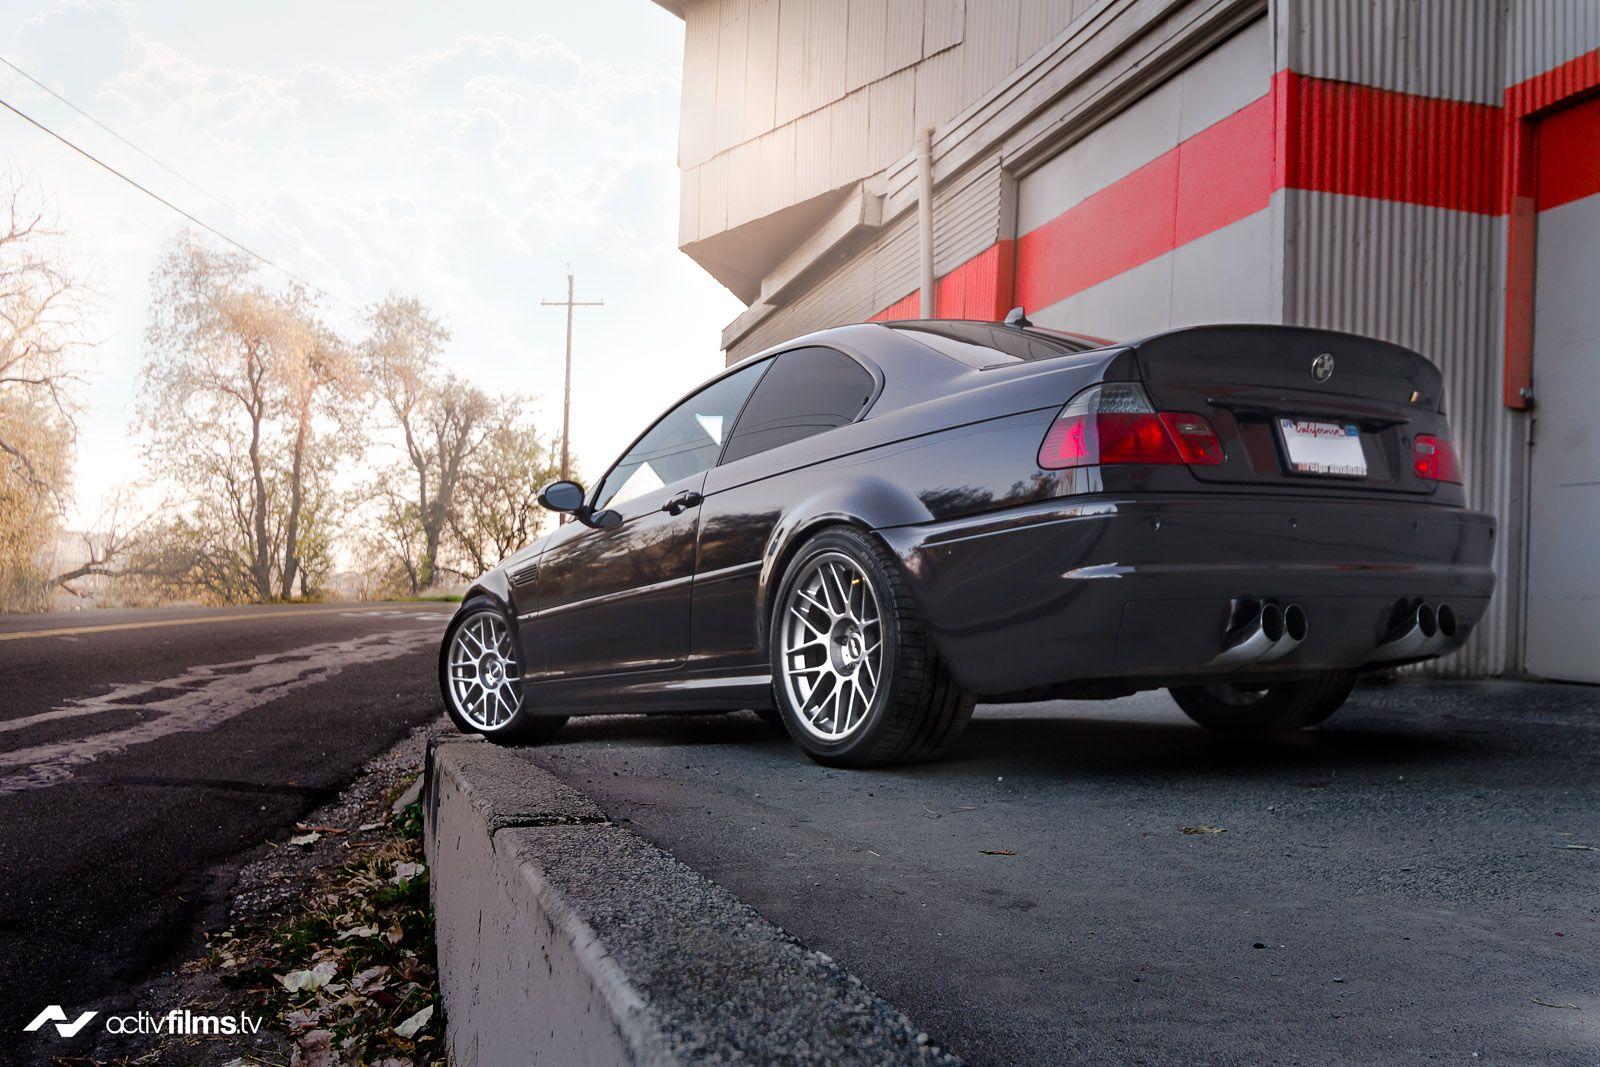 Wallpaper: BMW E92 M3 And BMW E46 M3 By ActivFilms.TV